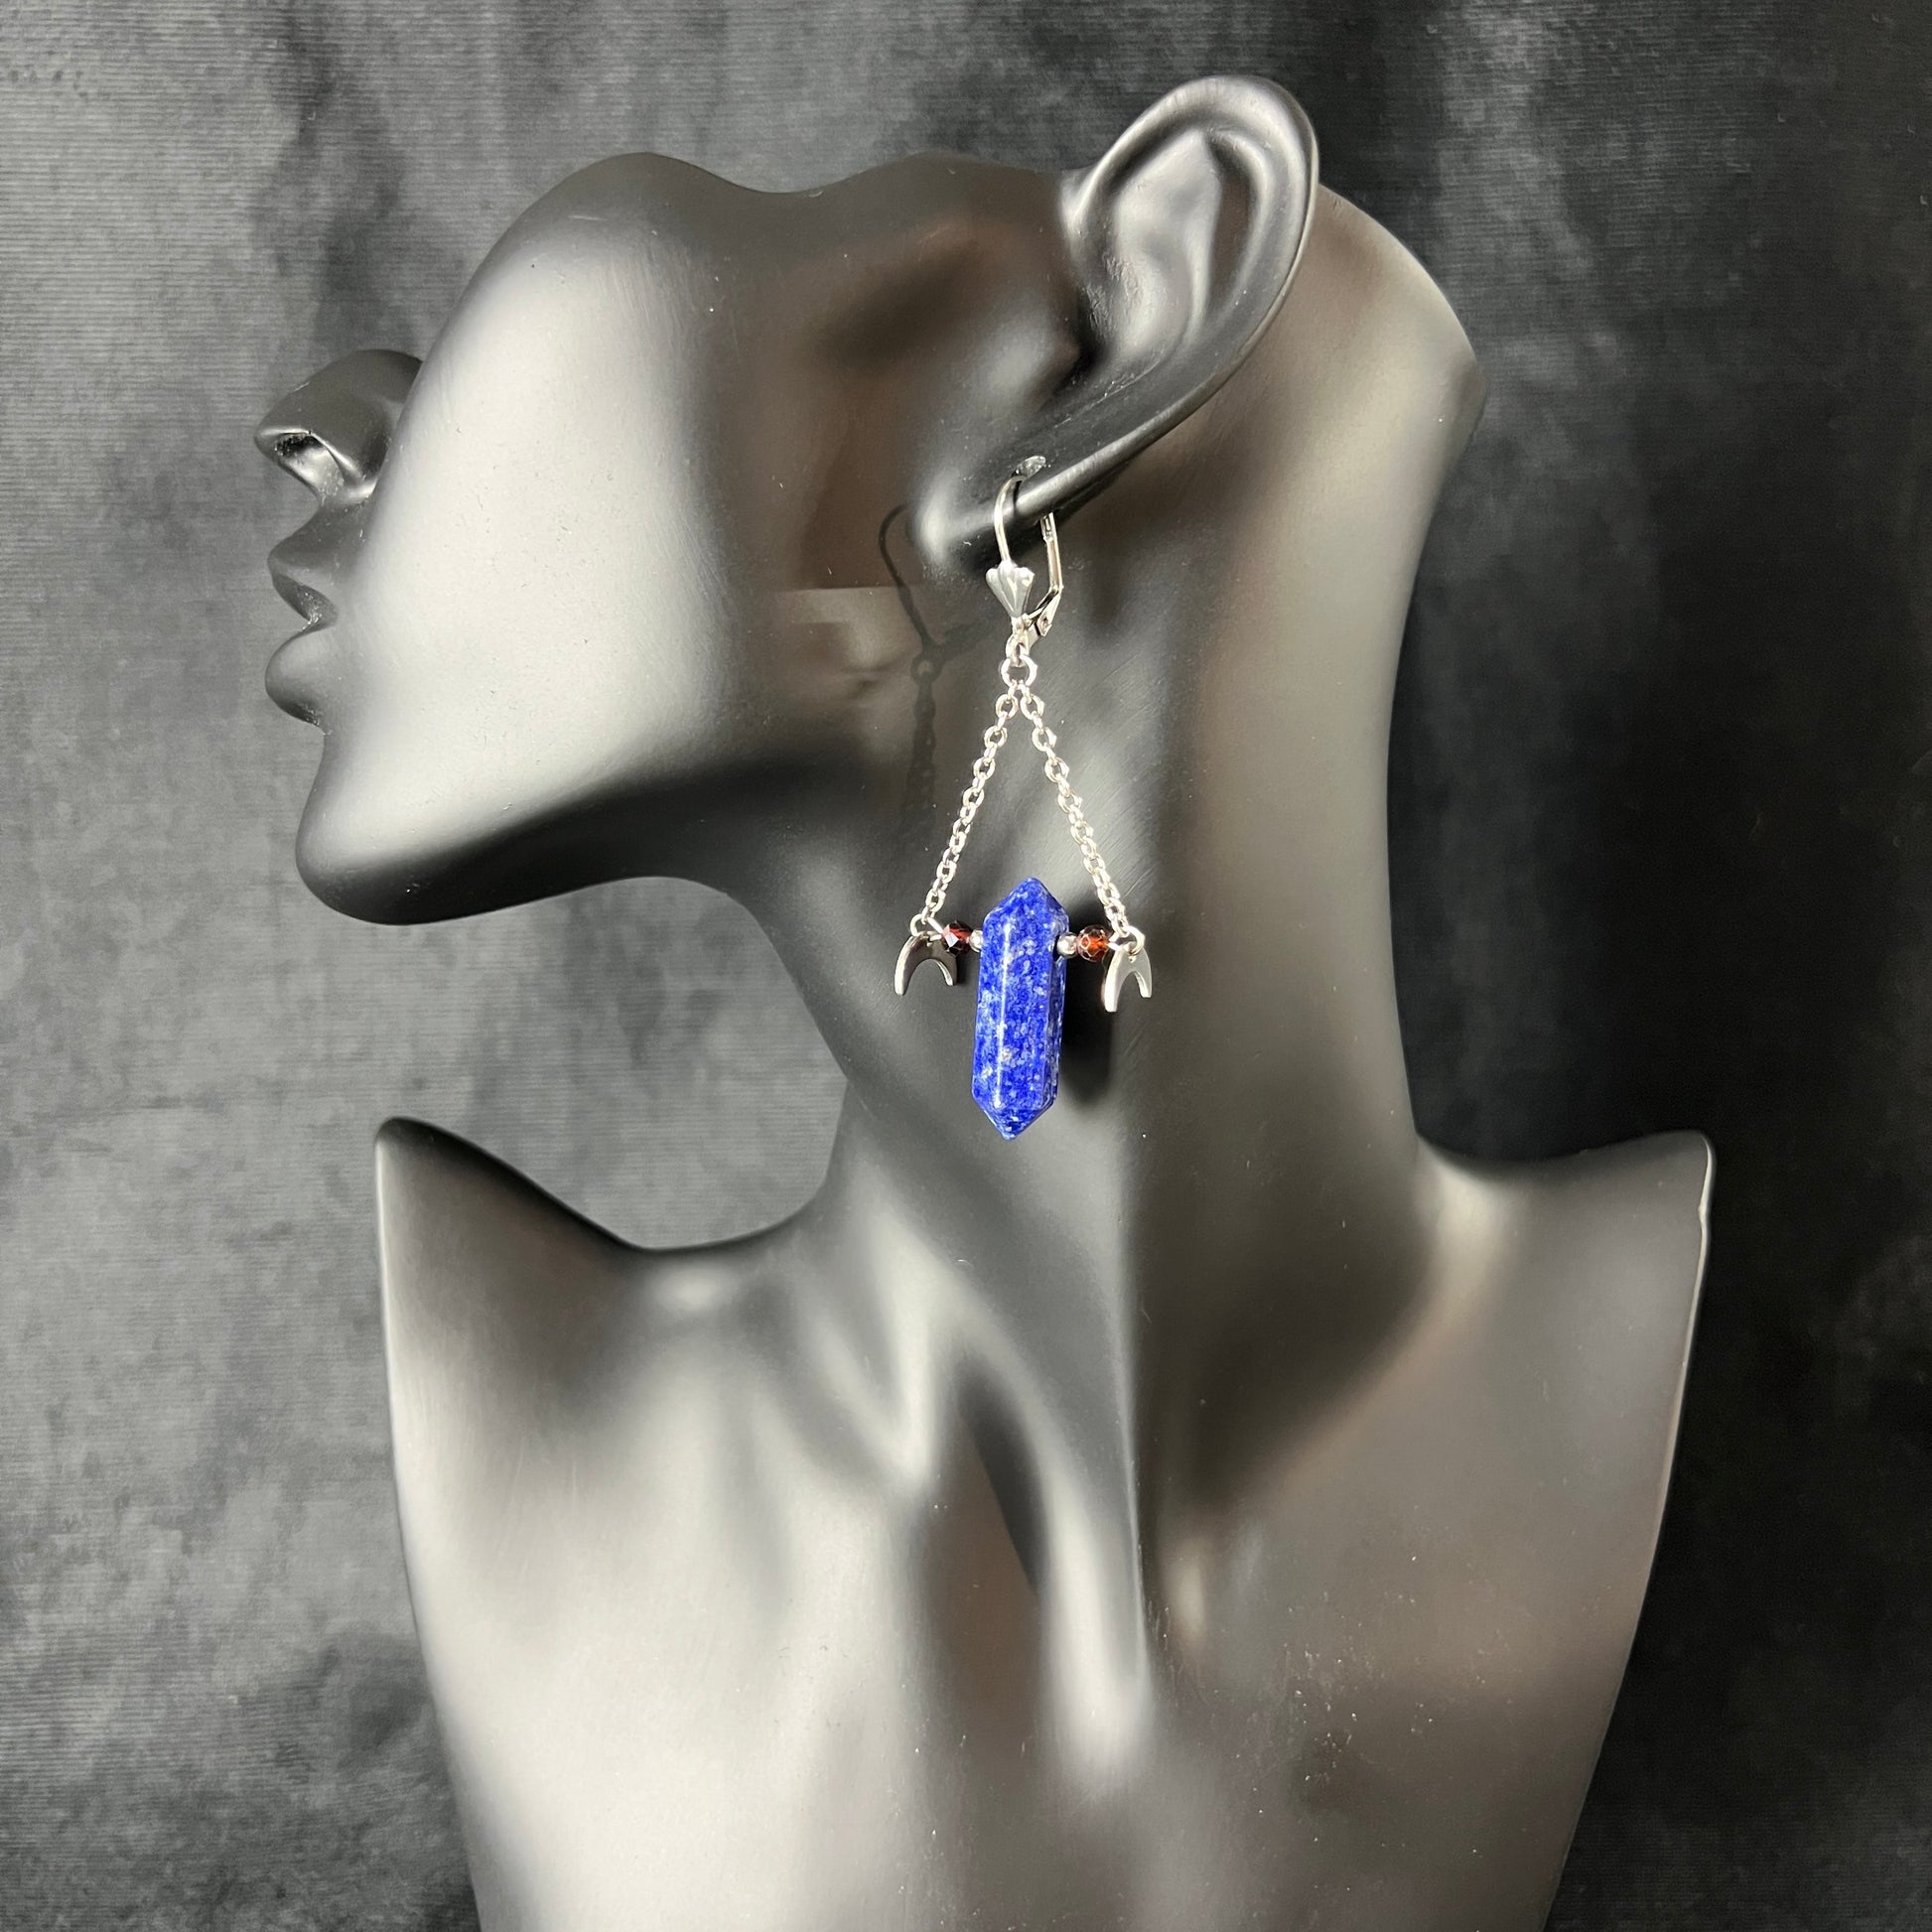 Gemstone earrings lapis lazuli garnet and stainless steel  with moon crescent spiritual jewelry statement earrings